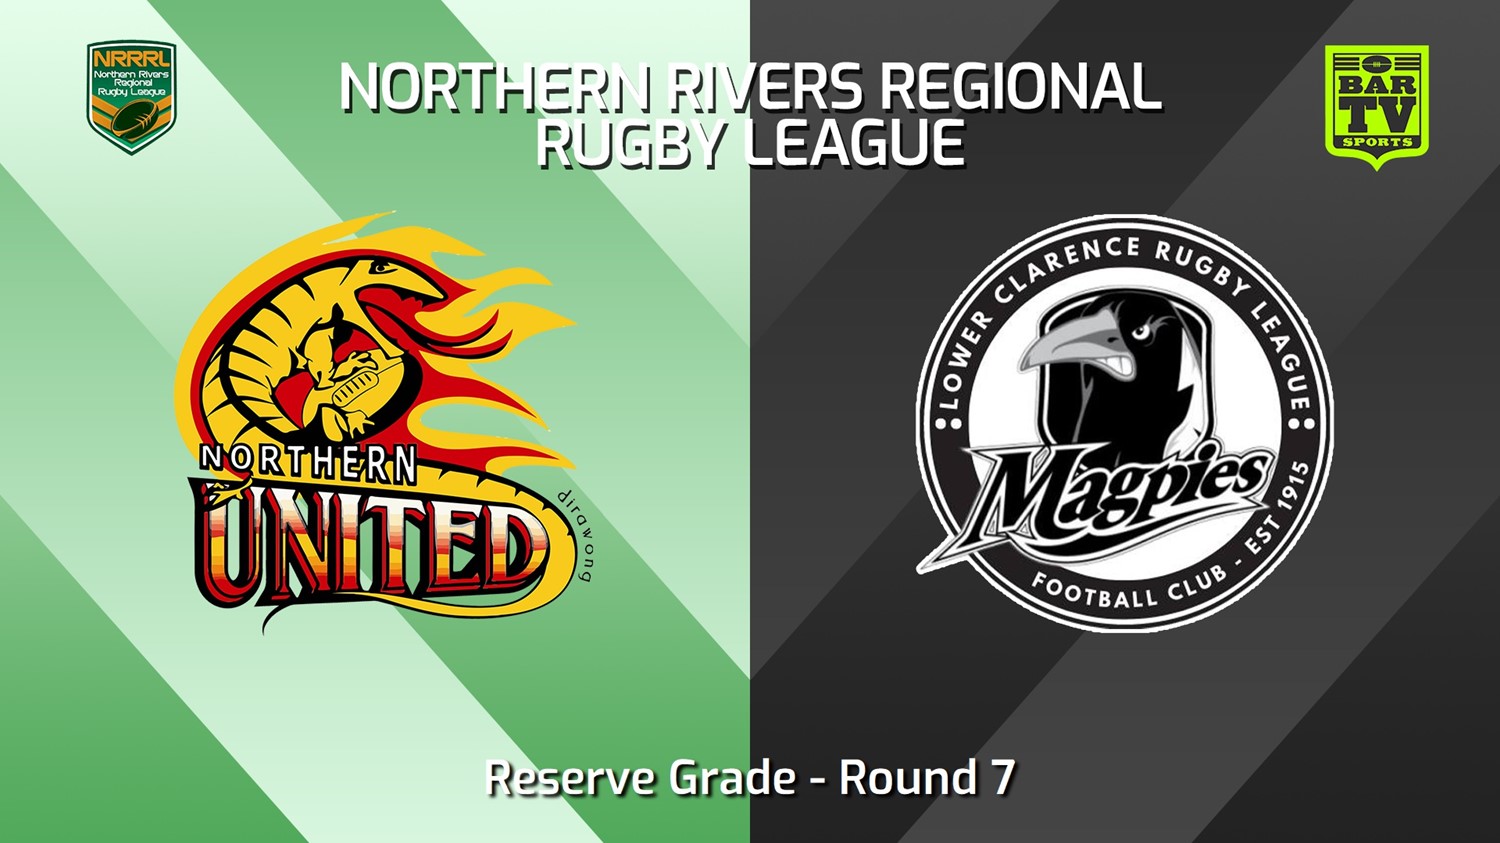 240518-video-Northern Rivers Round 7 - Reserve Grade - Northern United v Lower Clarence Magpies Slate Image